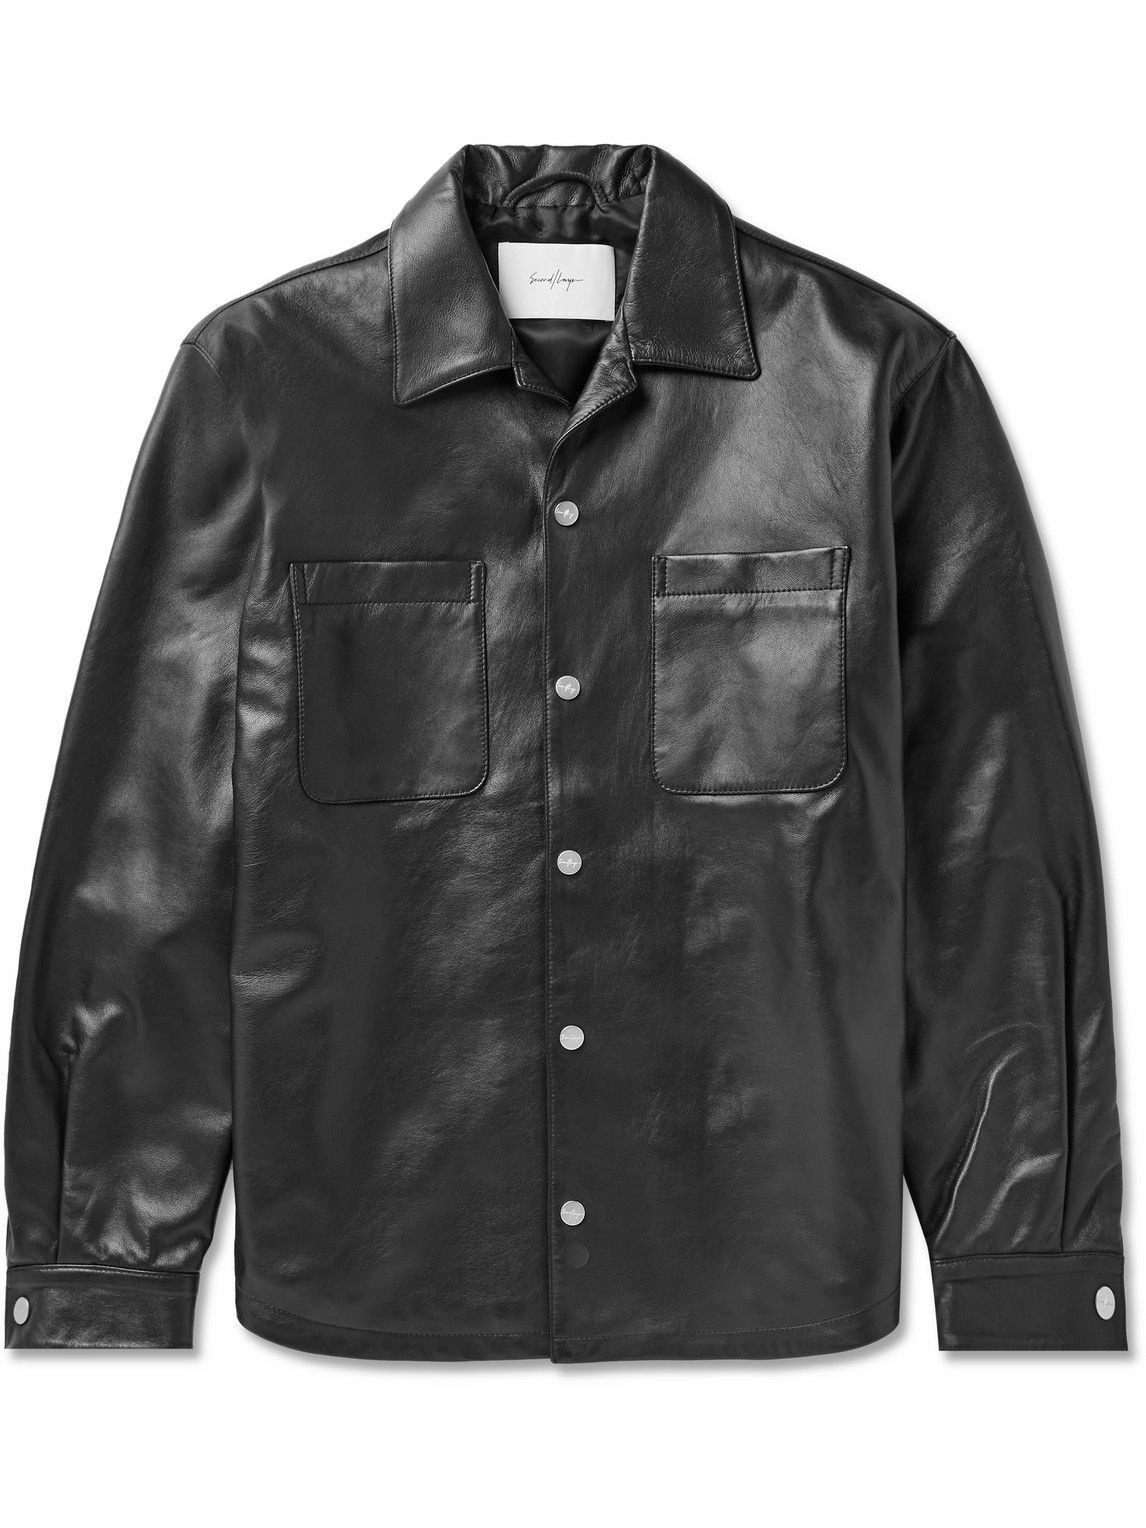 SECOND / LAYER - Rico Leather Overshirt - Black Second/Layer